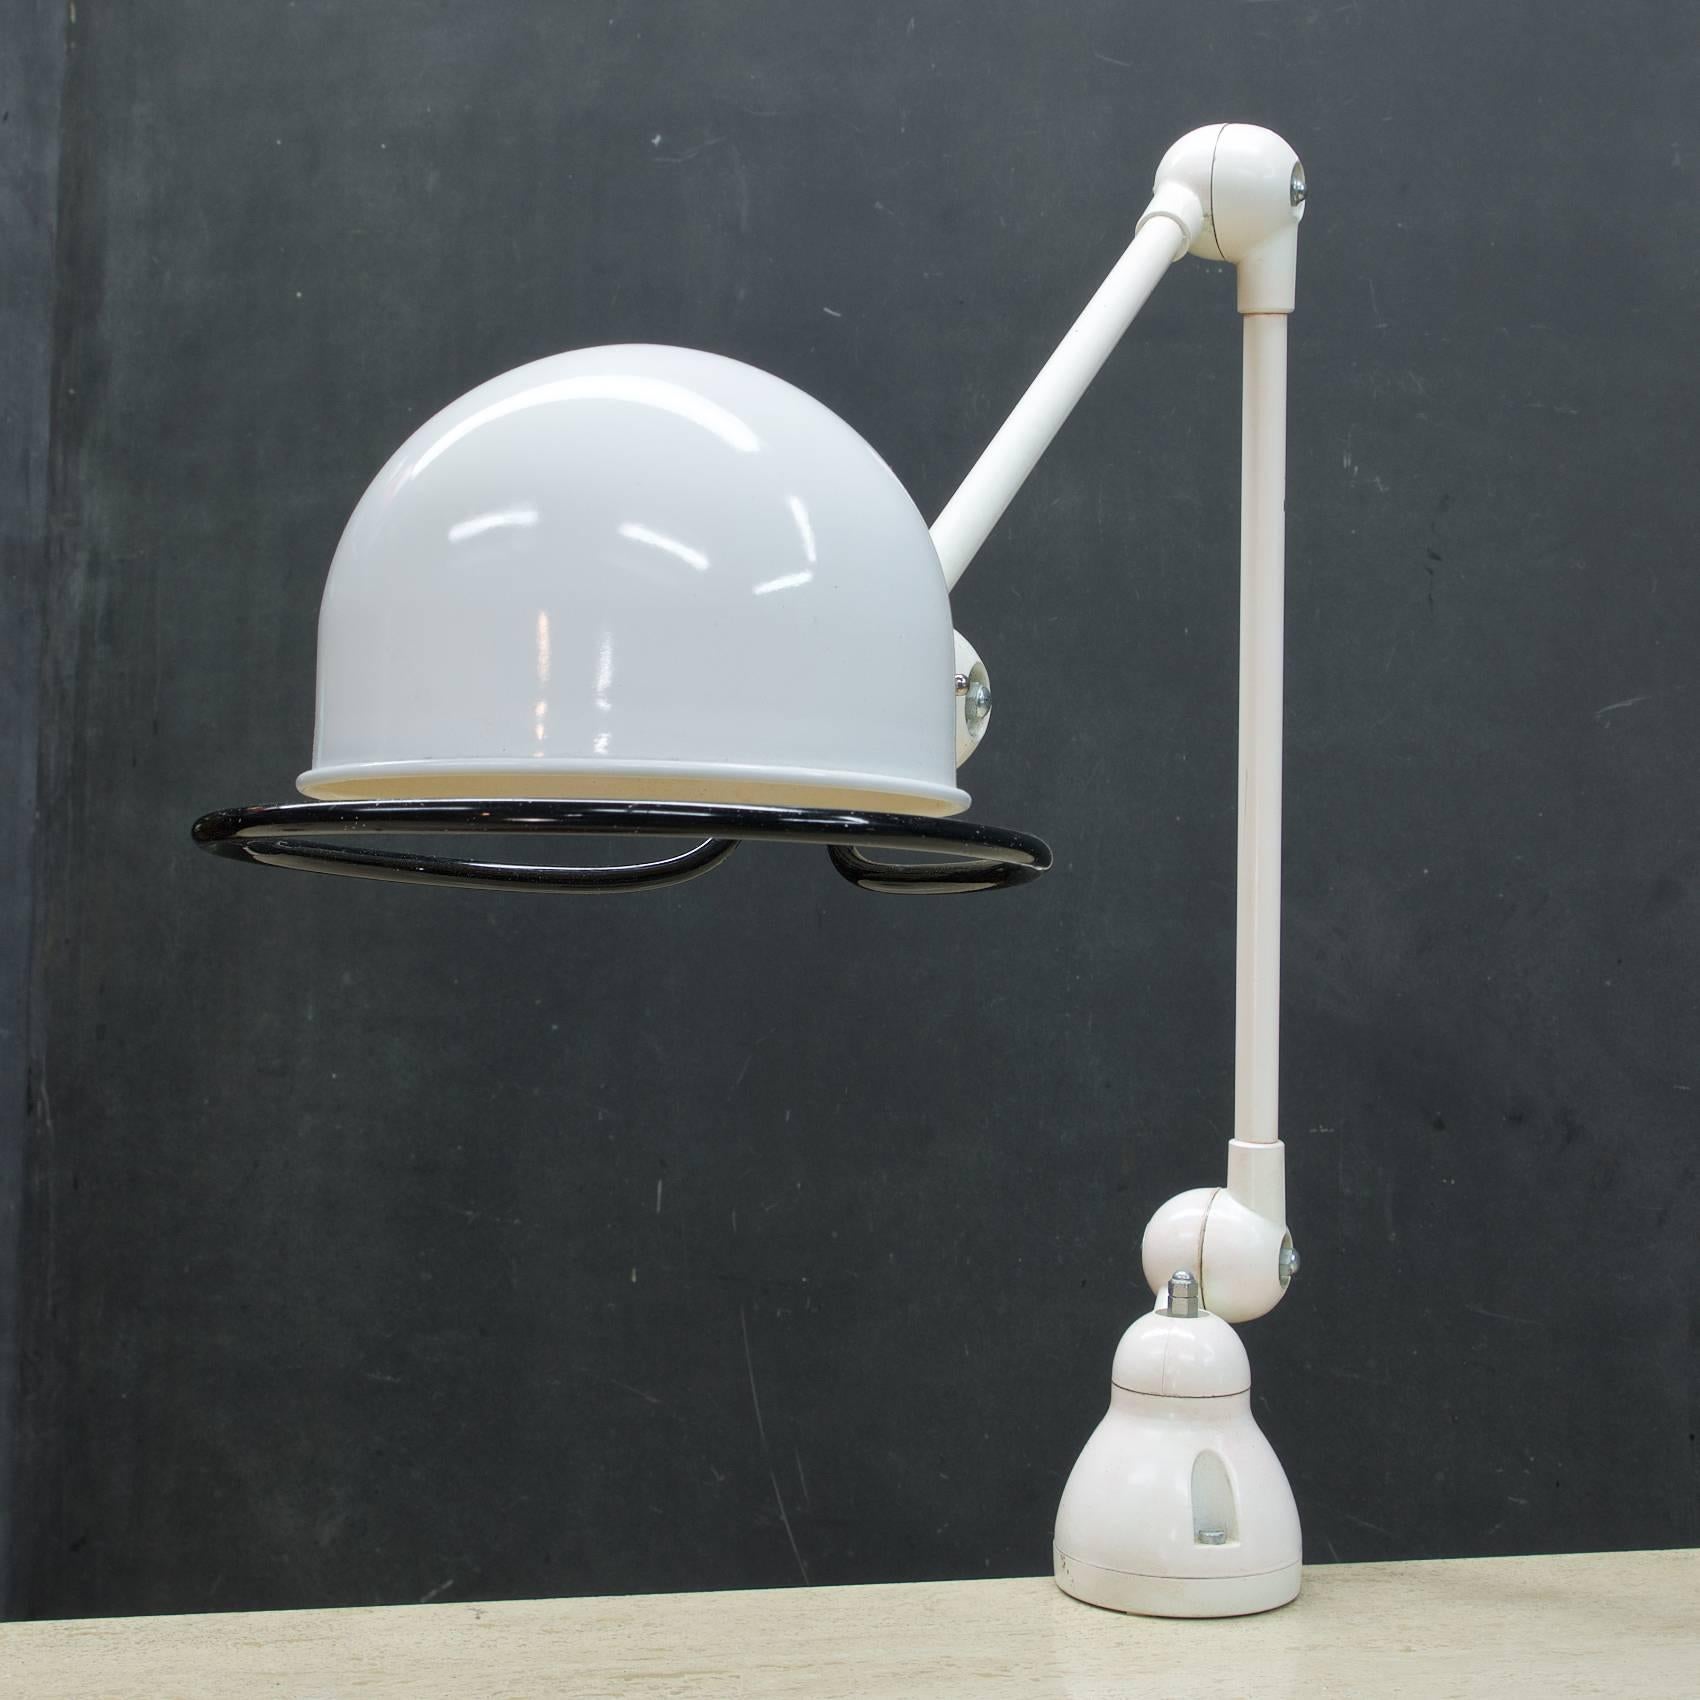 Two-armed French Industrial drafting task lamp. The Jielde lamp was designed in the 1950s by Jean-Louis Domecq, two arms each 15.7